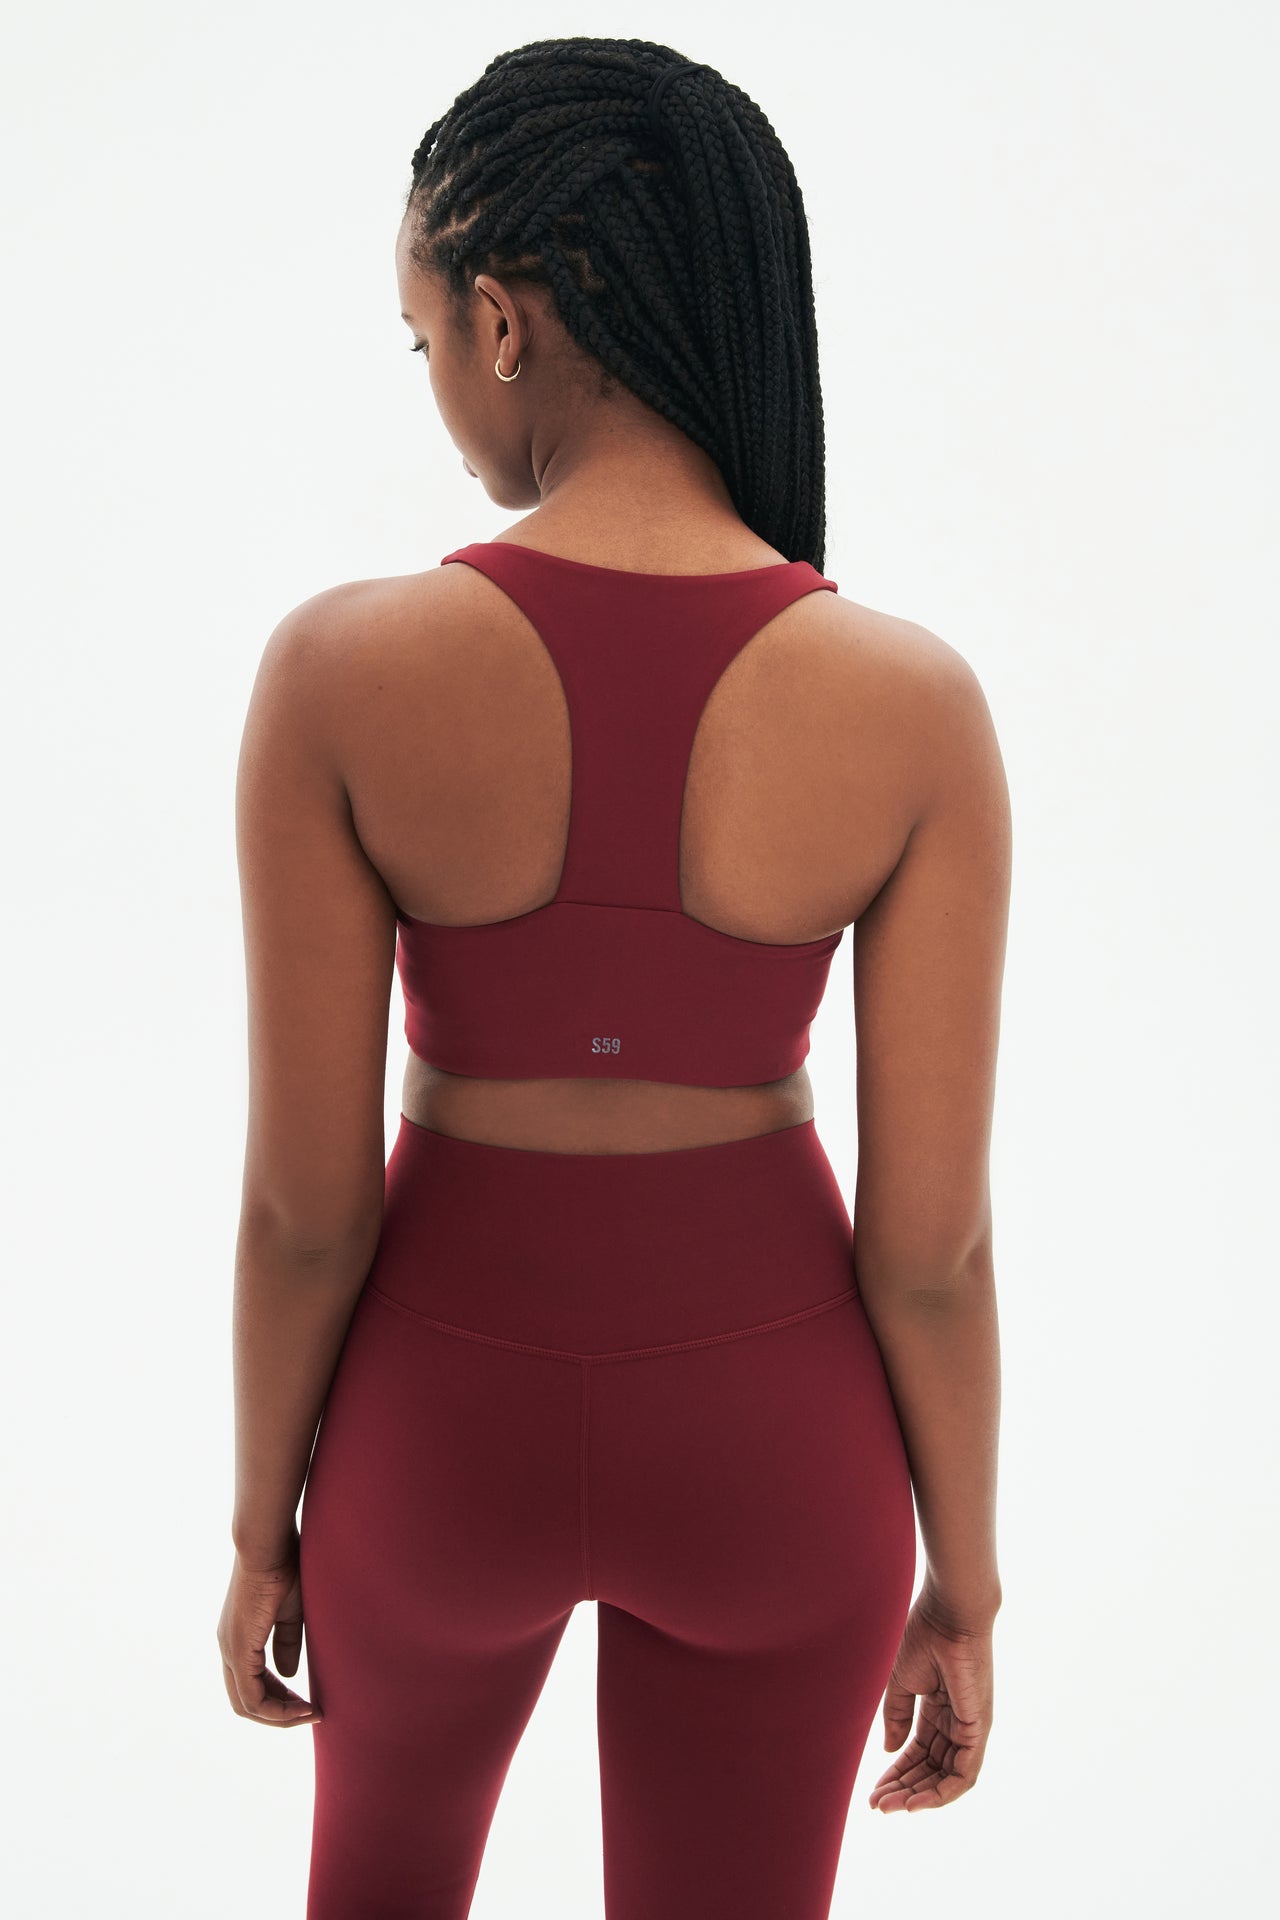 Back view of woman with black braids wearing dark red bra with racerback and dark red leggings